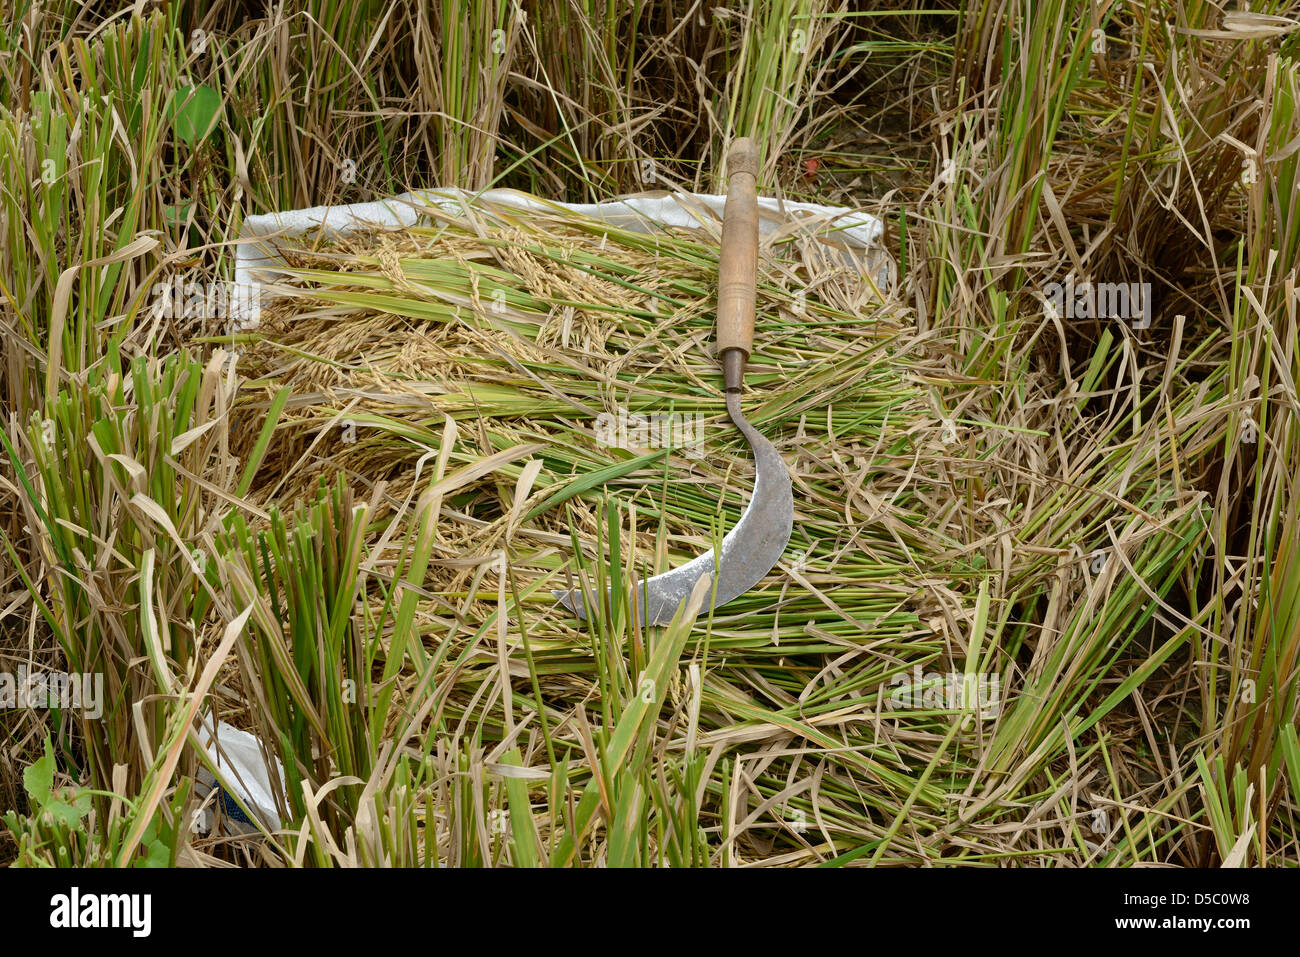 Indonesia, Bali, Ubud, central region, sickle in a rice field around Stock Photo